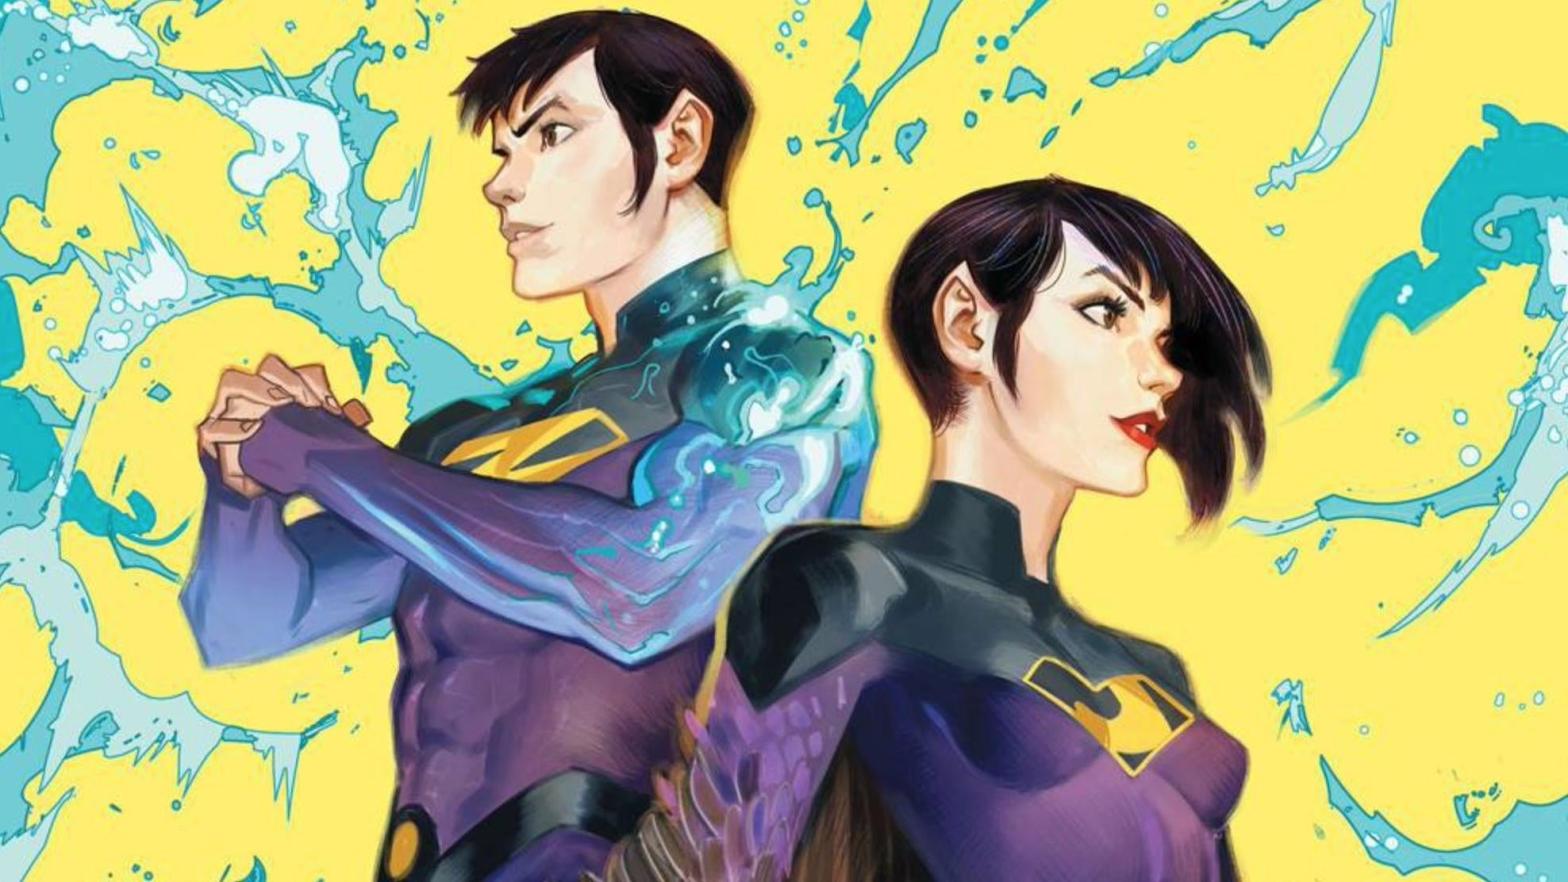 DC's Wonder Twins are getting a movie. (Image: DC Comics/Stephen Byrne)